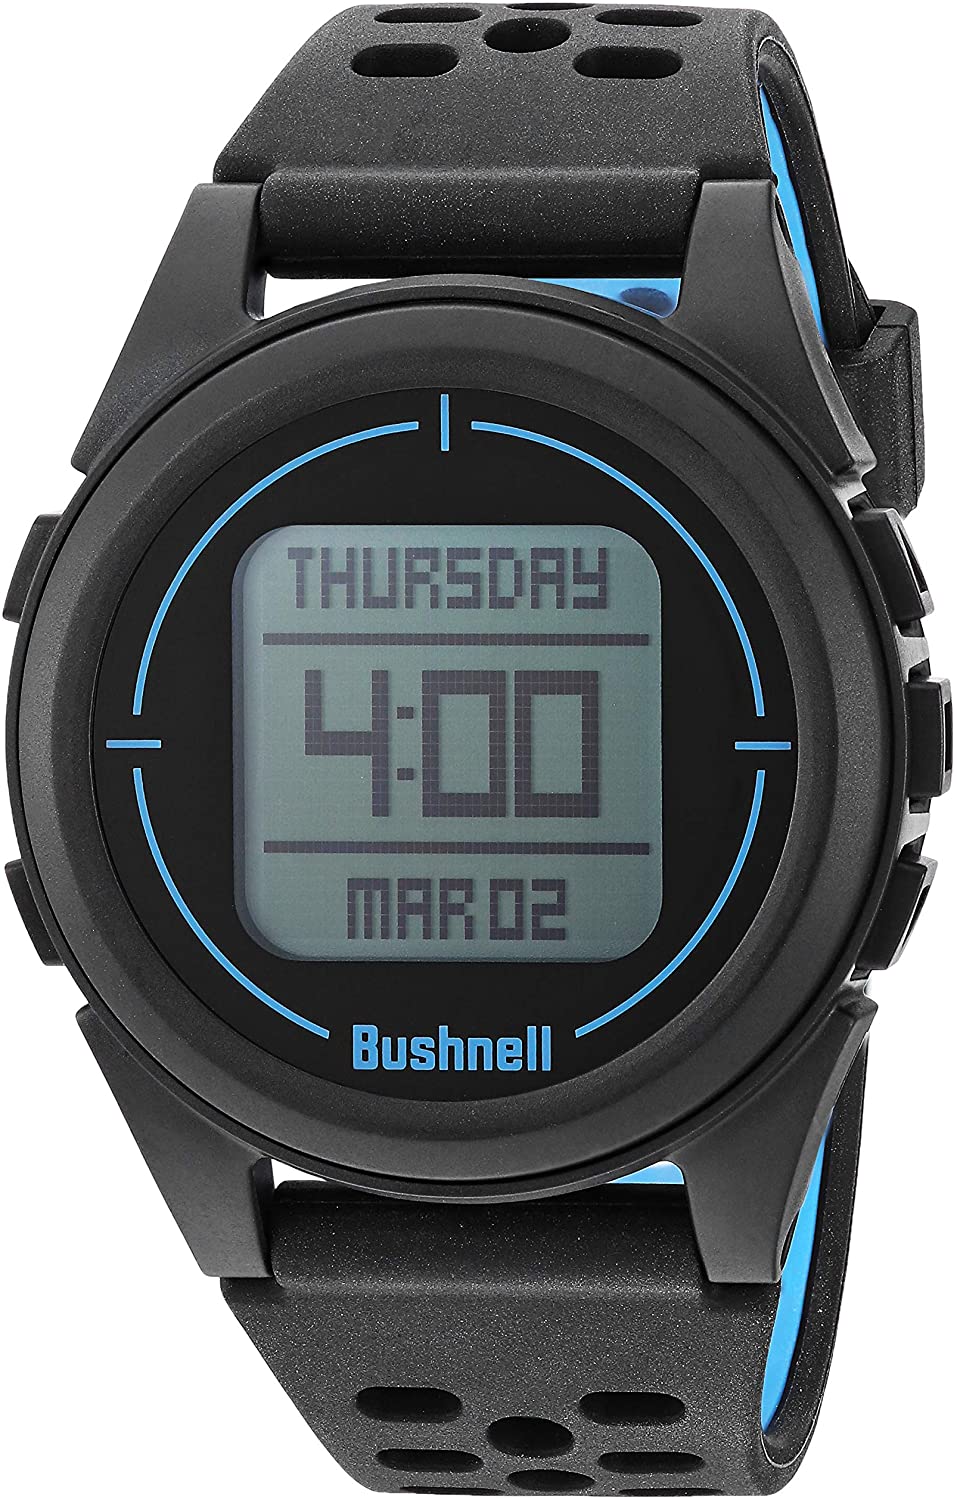 Bushnell Mens Neo Ion 2 Golf GPS Watch